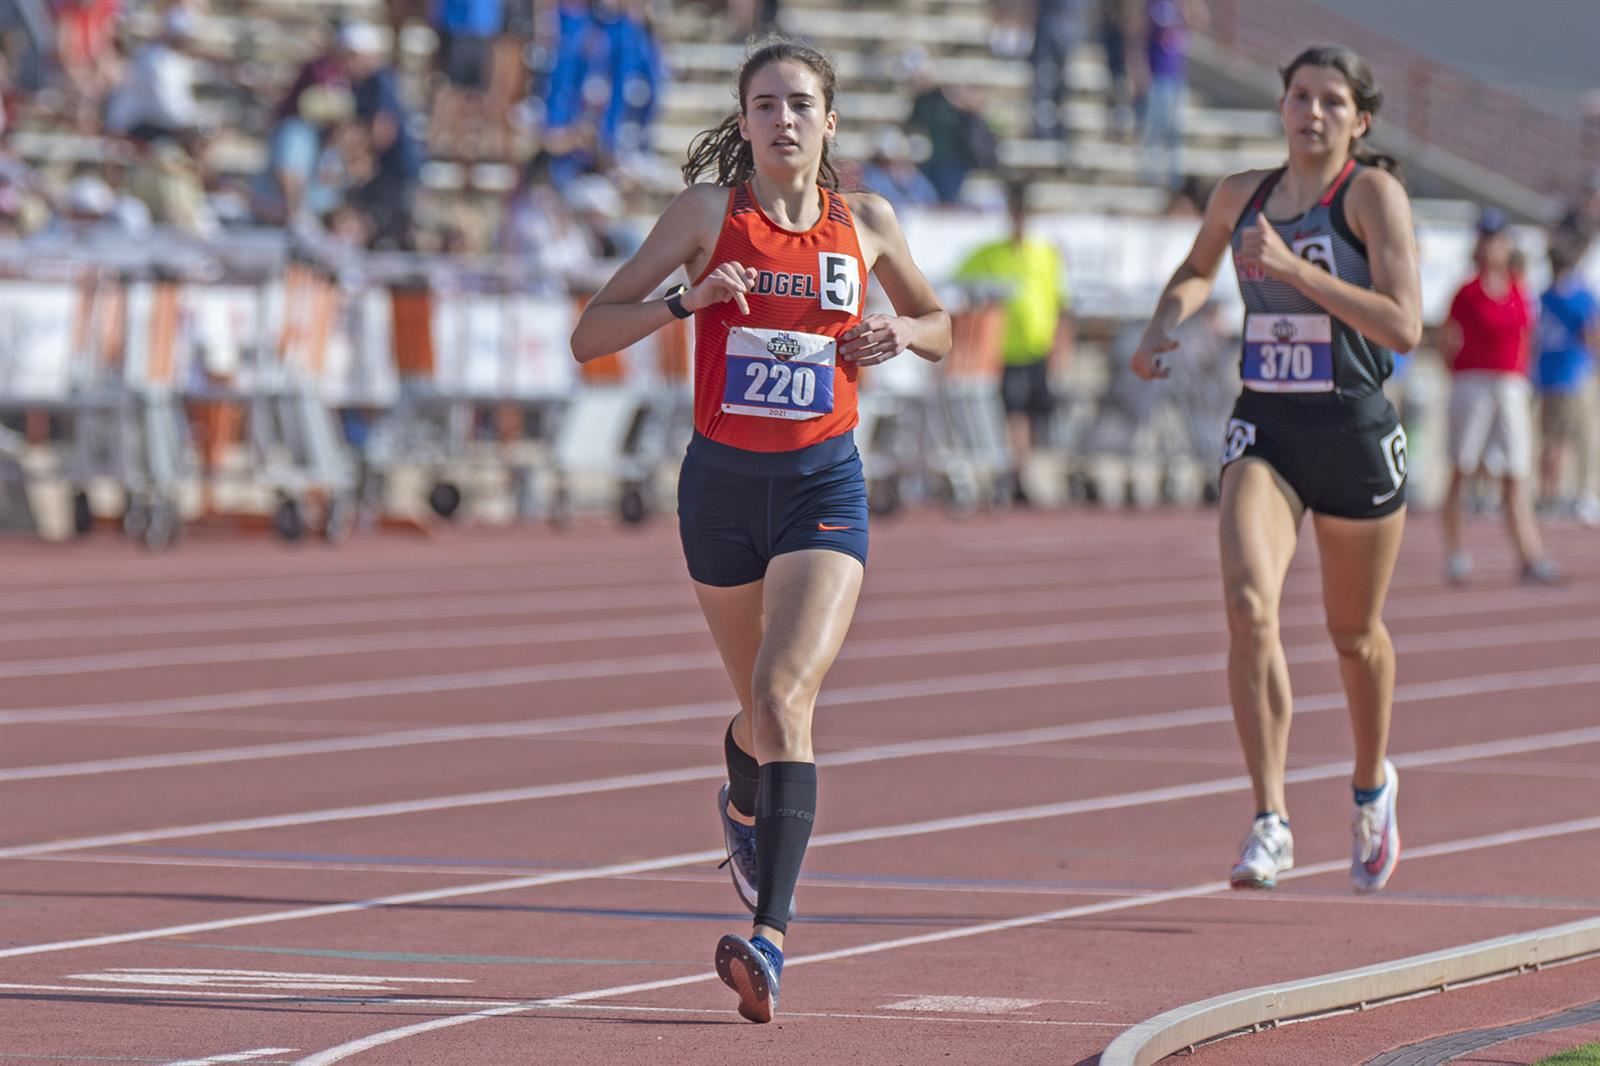 Bridgeland High School graduate Emily Ellis was among 32 CFISD students named to the THSCA academic all-state team.